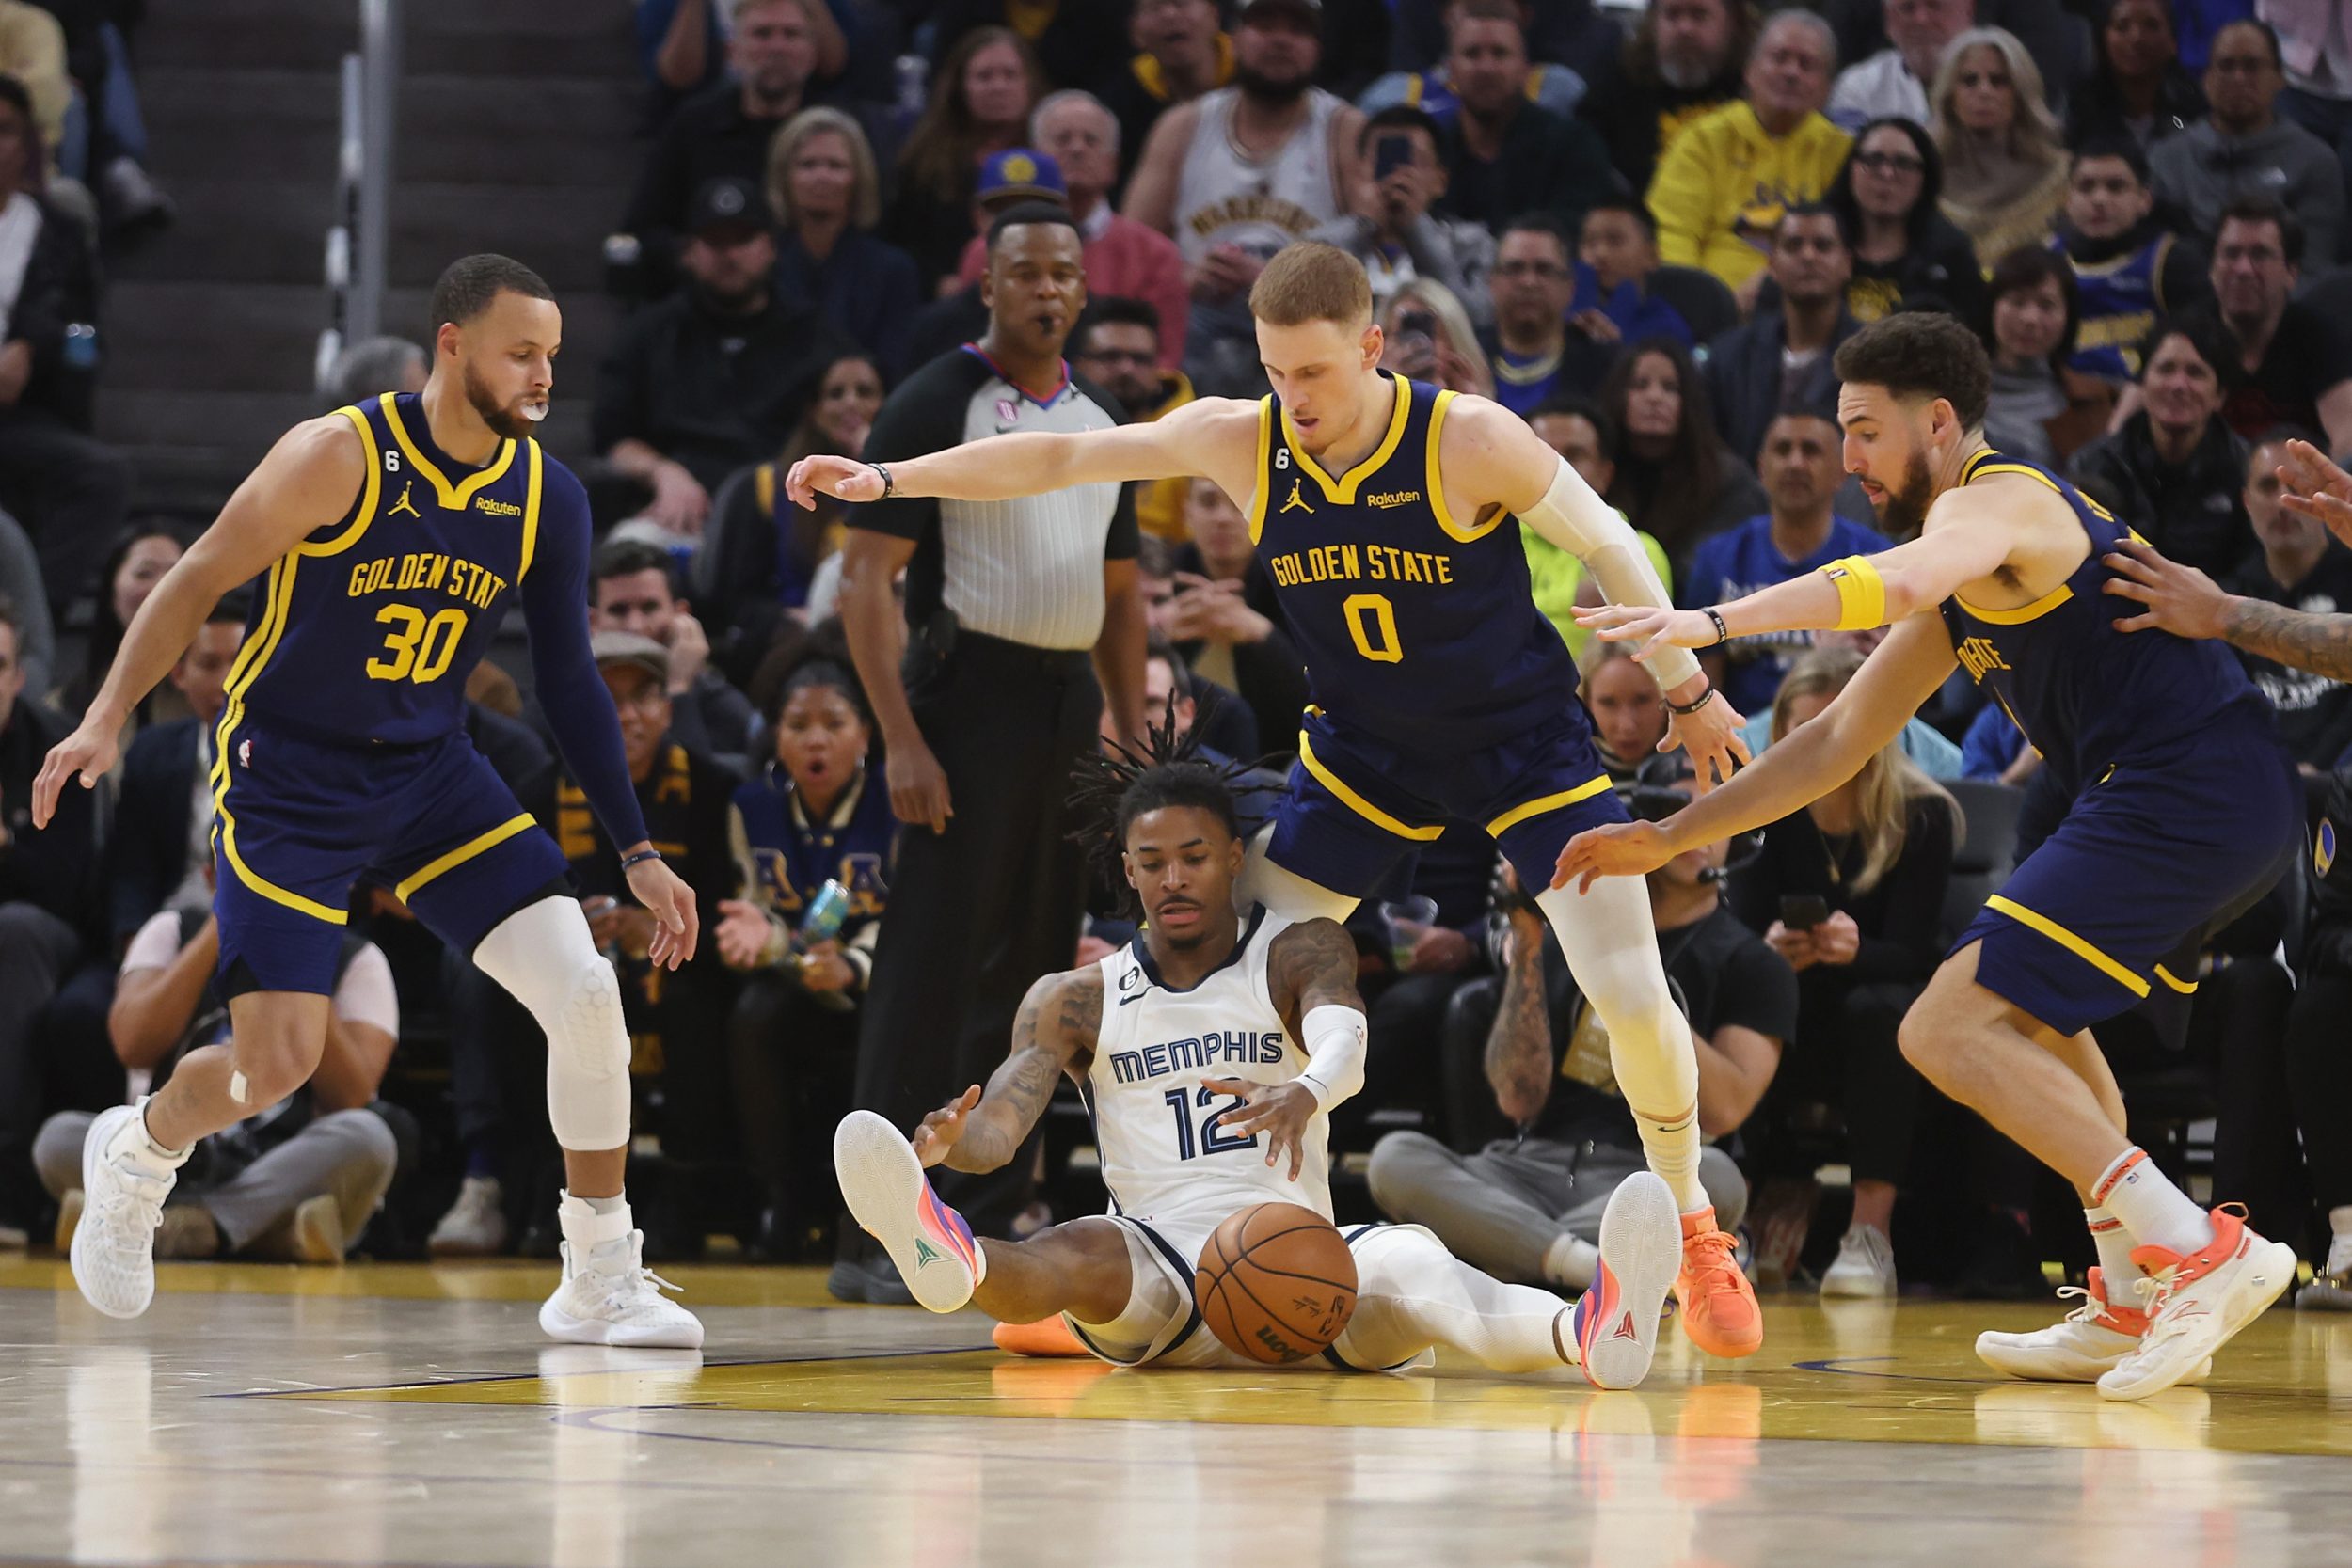 SAN FRANCISCO, CALIFORNIA - JANUARY 25: Ja Morant #12 of the Memphis Grizzlies competes for the loose ball against Stephen Curry #30, Donte DiVincenzo #0 and Klay Thompson #11 of the Golden State Warriors in the fourth quarter at Chase Center on January 25, 2023 in San Francisco, California. NOTE TO USER: User expressly acknowledges and agrees that, by downloading and/or using this photograph, User is consenting to the terms and conditions of the Getty Images License Agreement. (Photo by Lachlan Cunningham/Getty Images)